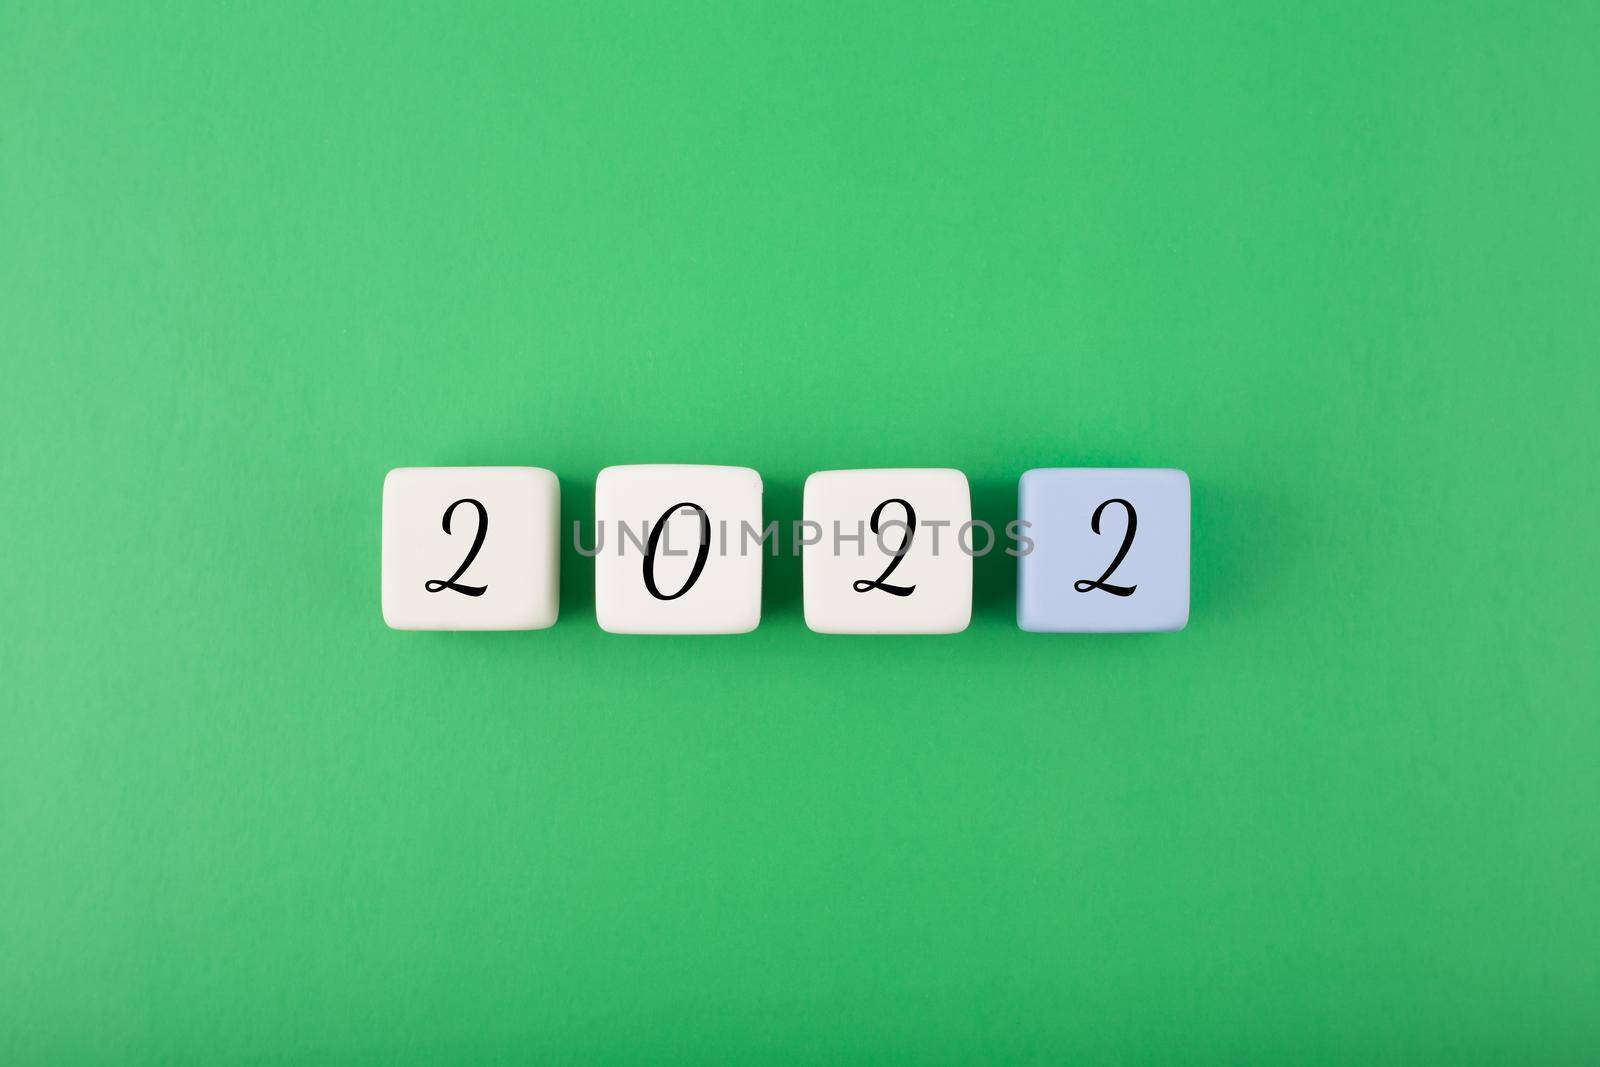 2022 numbers on white cubes against green background. Minimal elegant business style concept of New Year